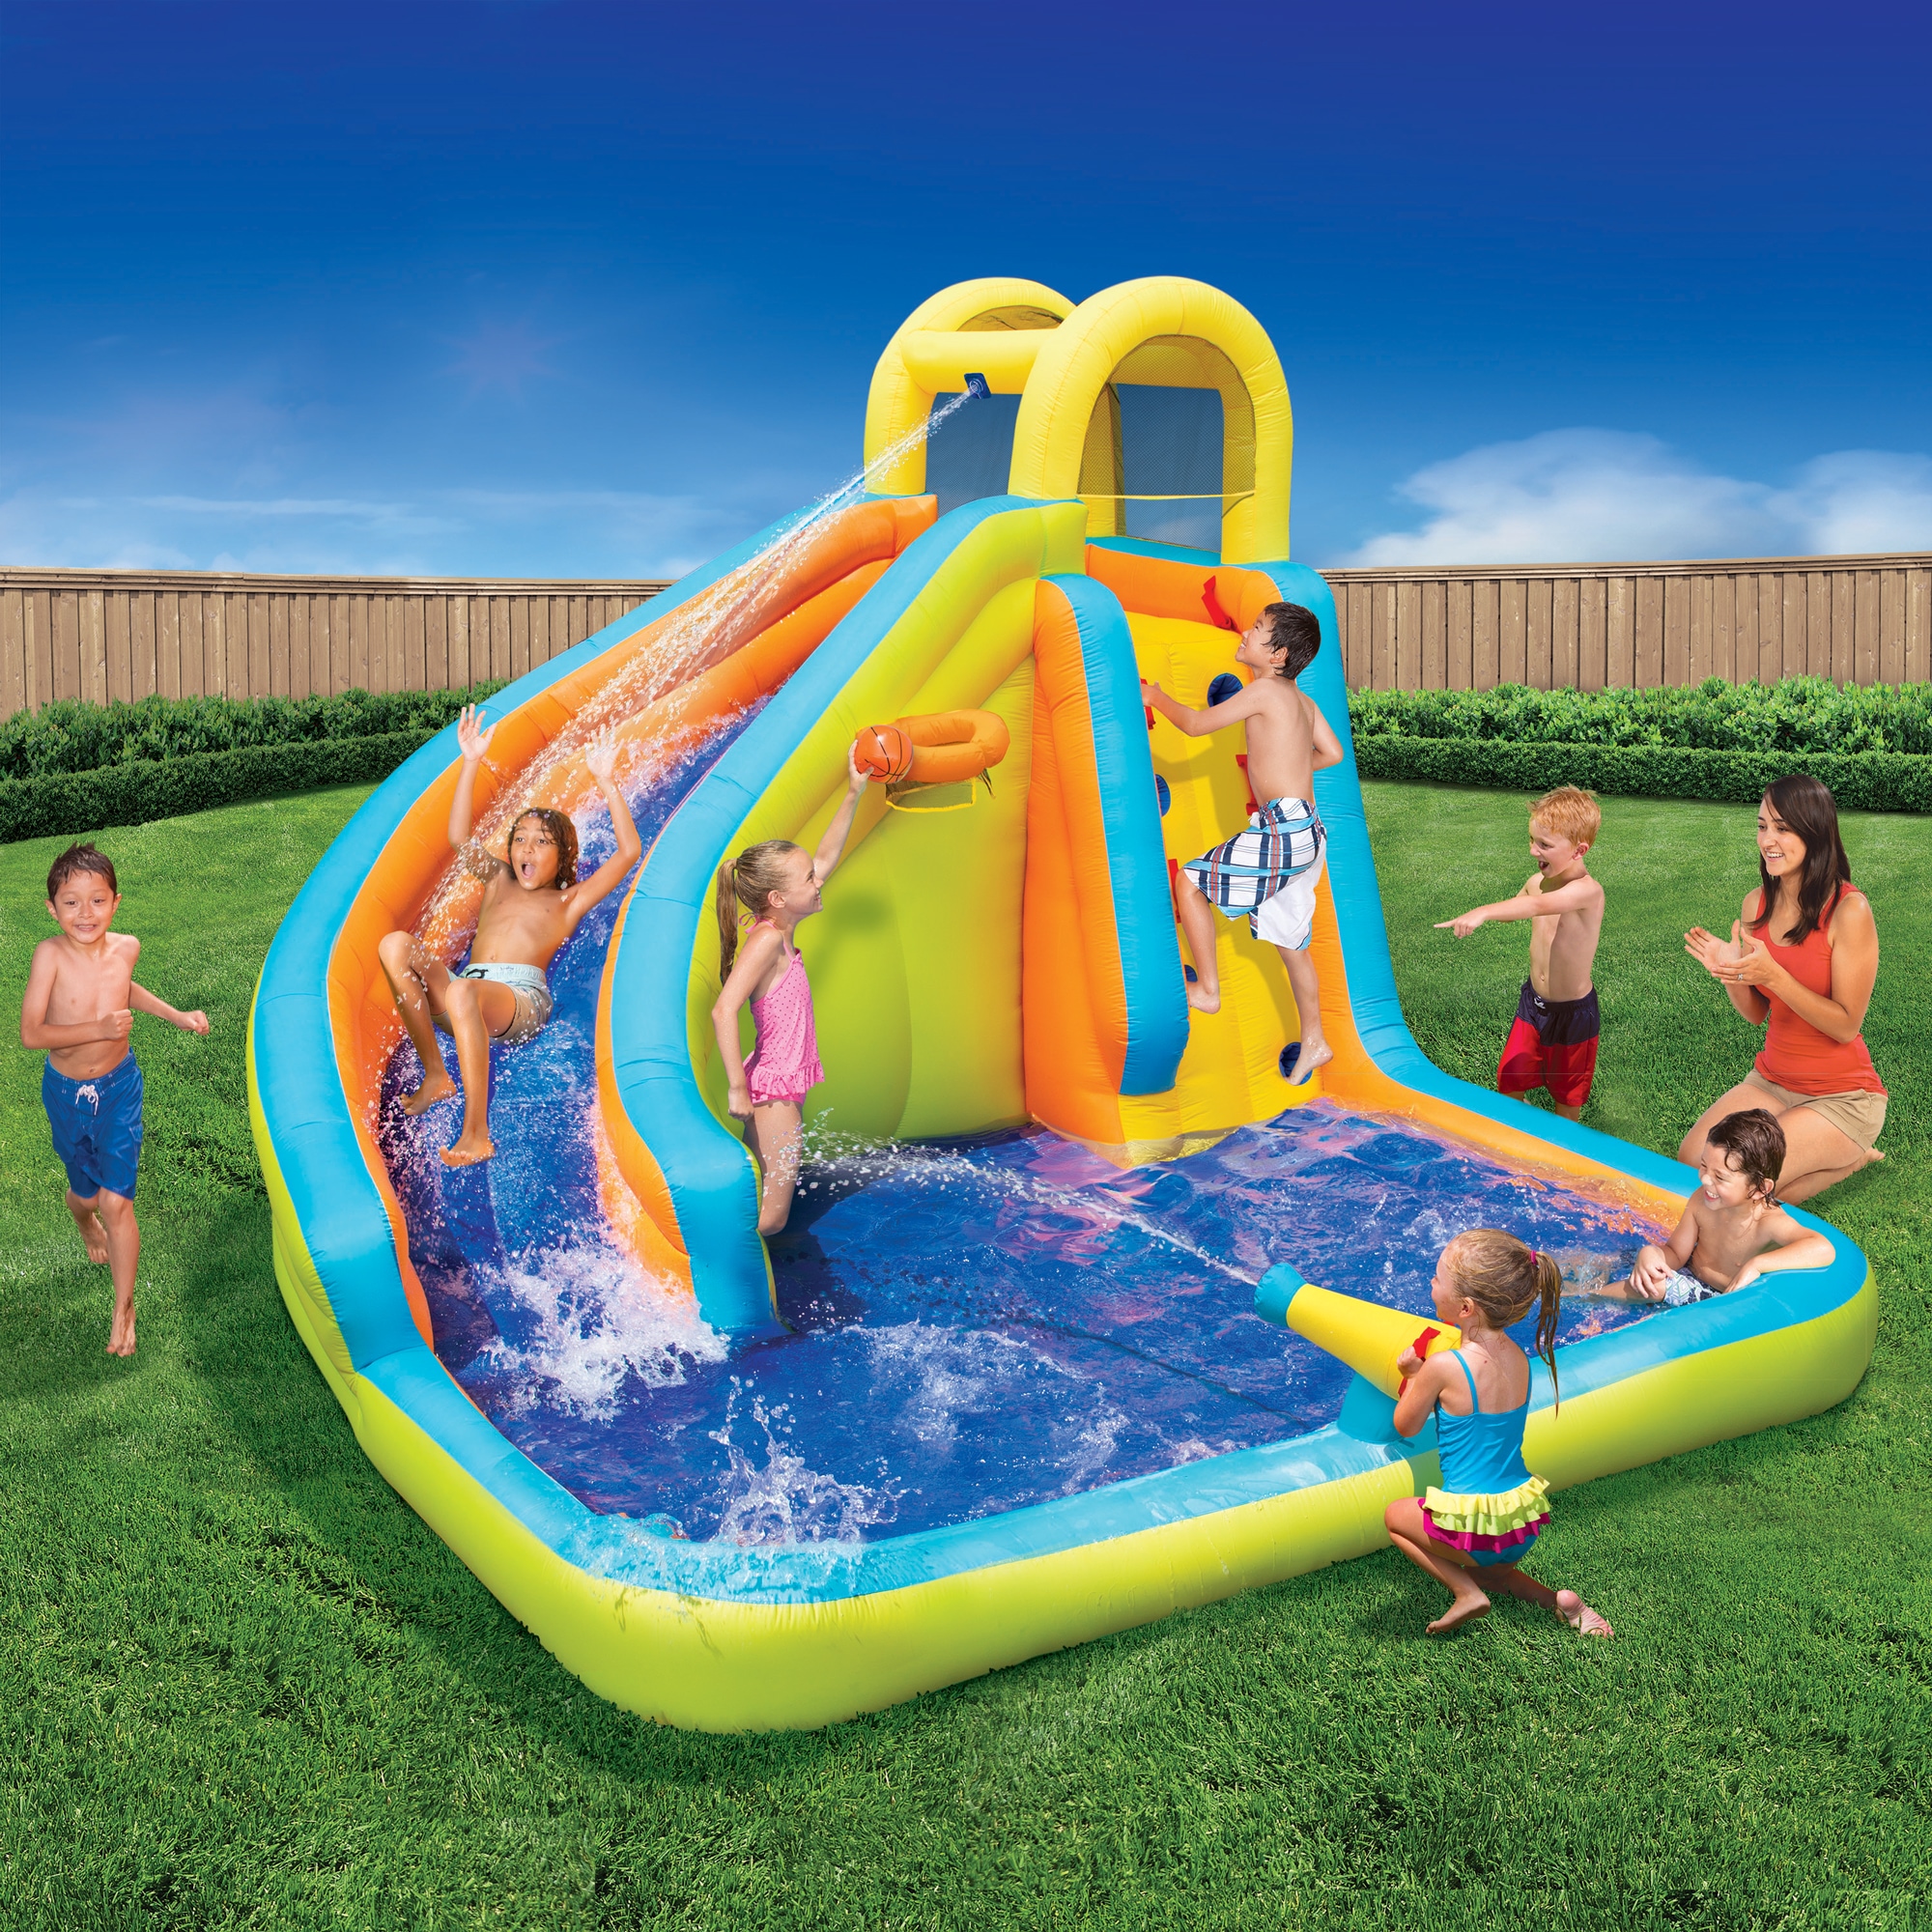 13636 for sale online Banzai Cyclone Splash Park Inflatable with Sprinkling Slide and Water Aqua Pool 